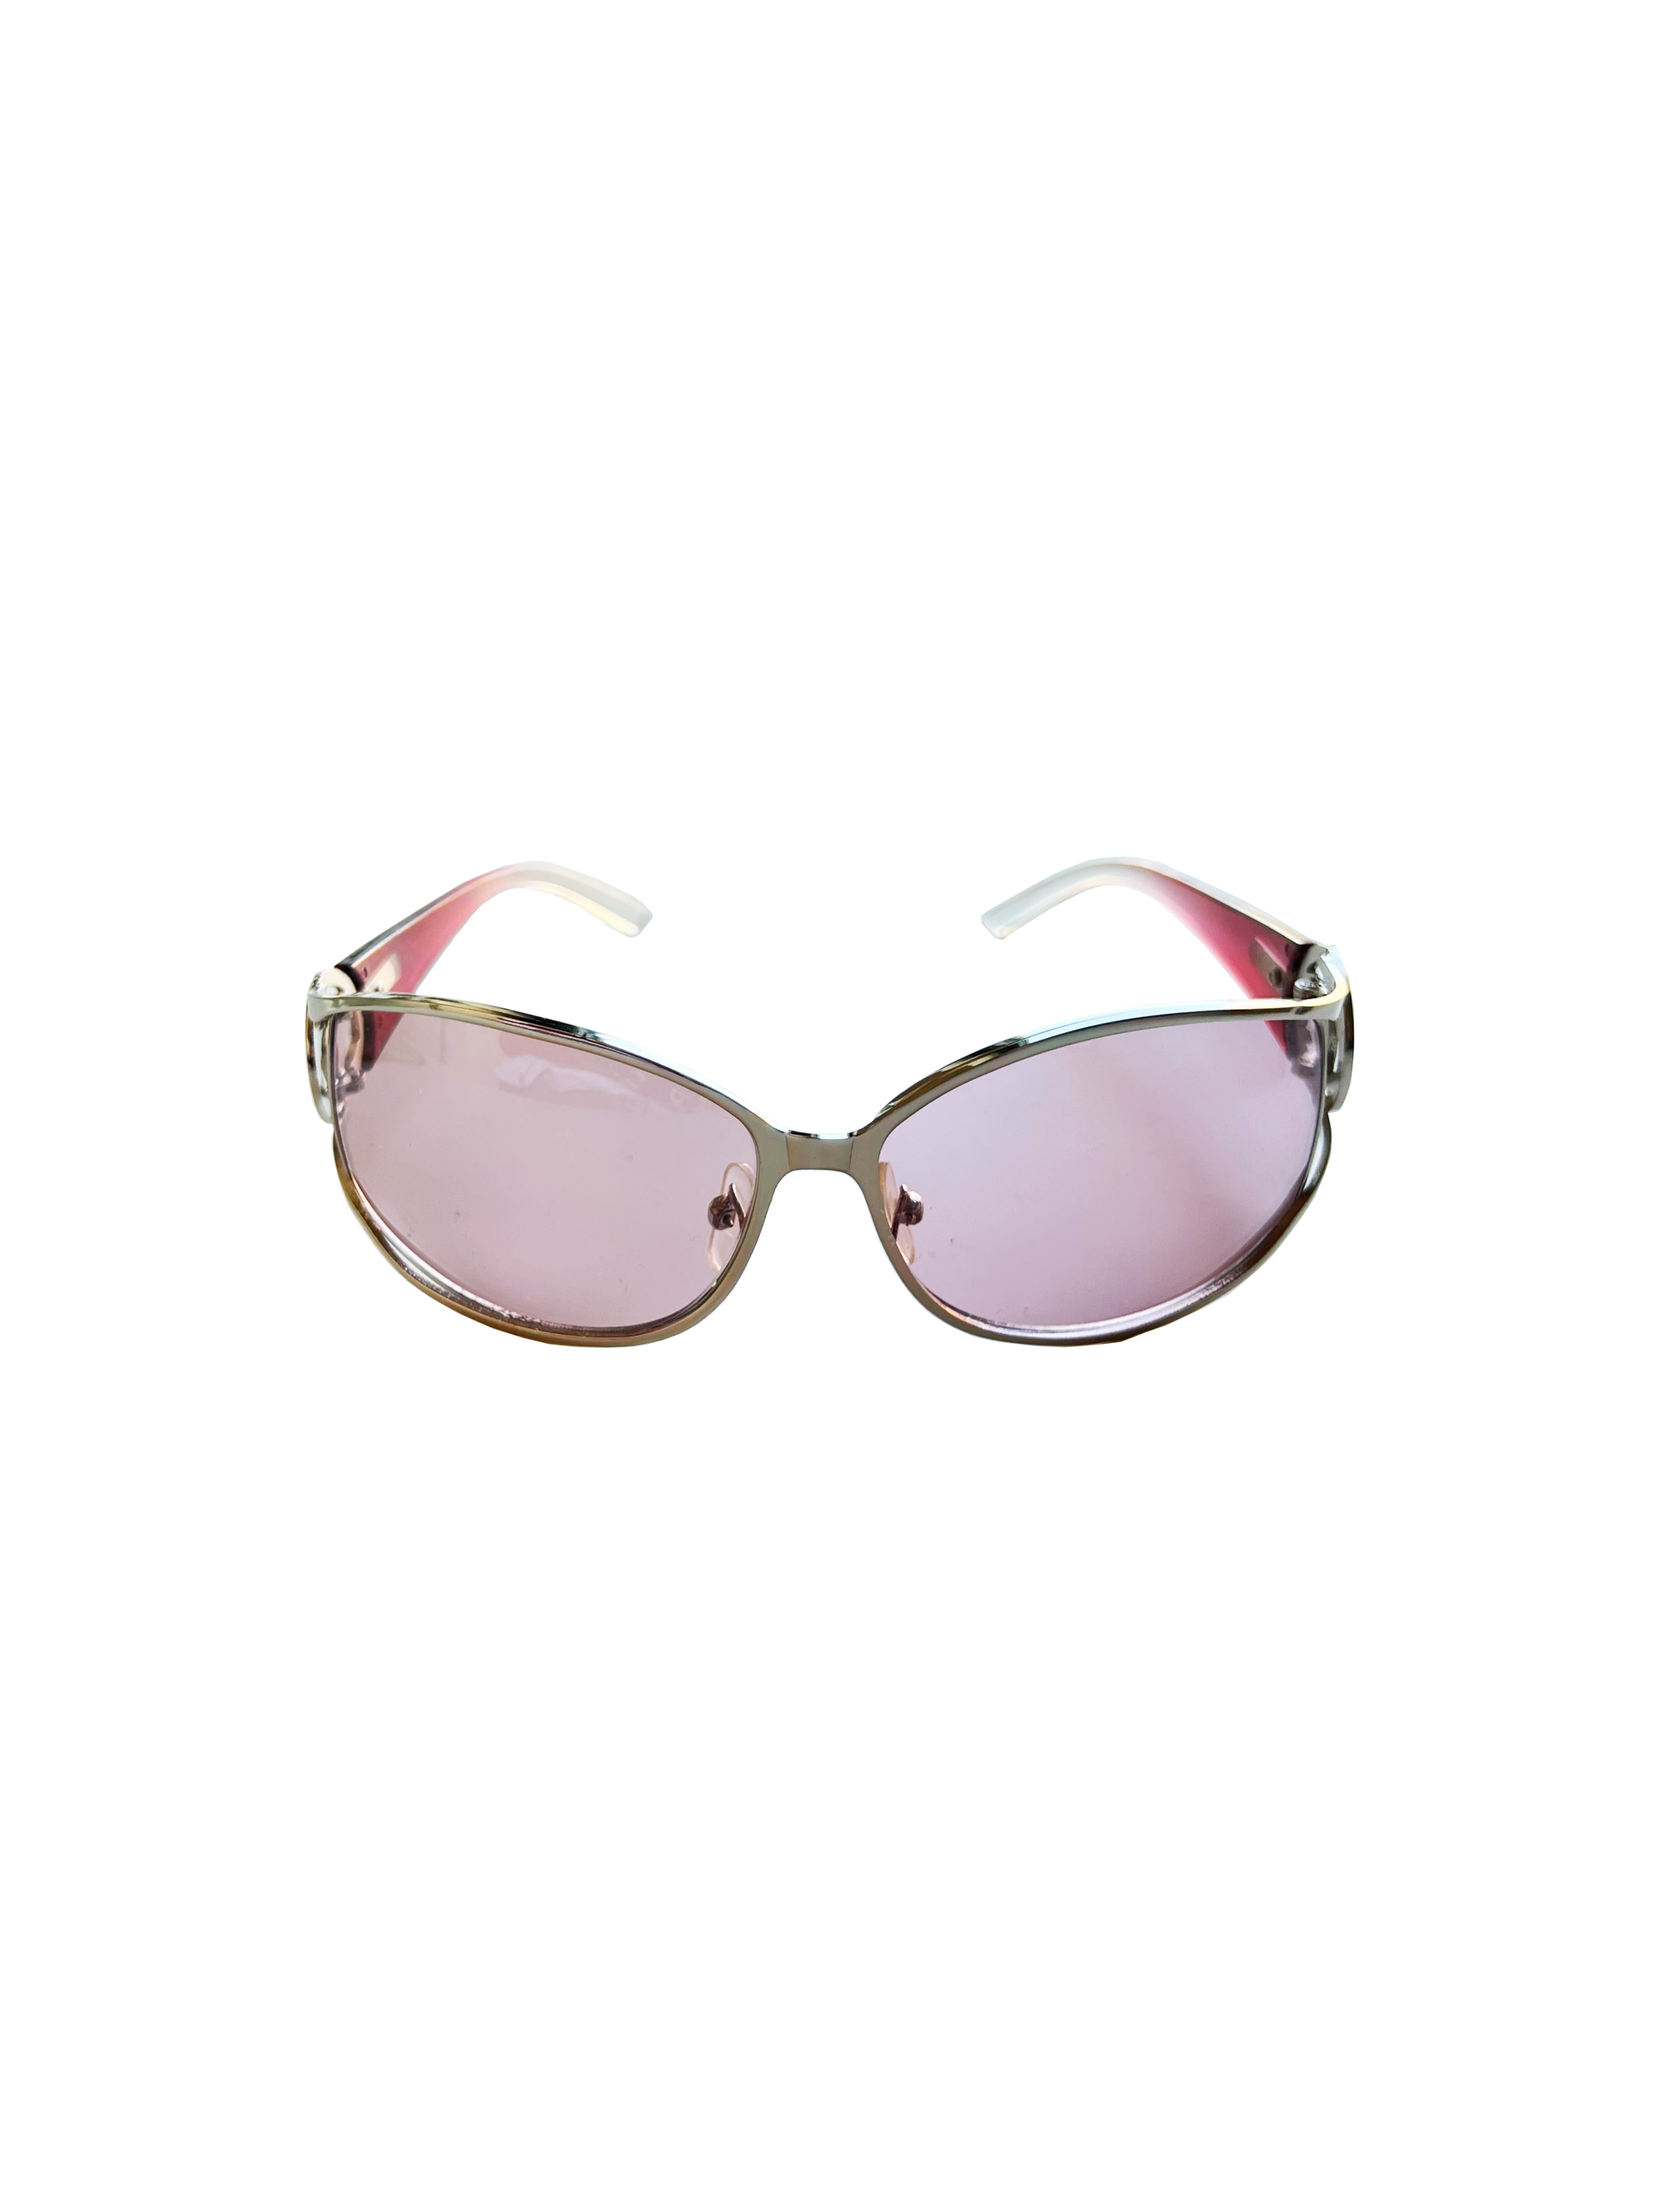 Vintage Chanel Clear Sunglasses 2000s Glasses S